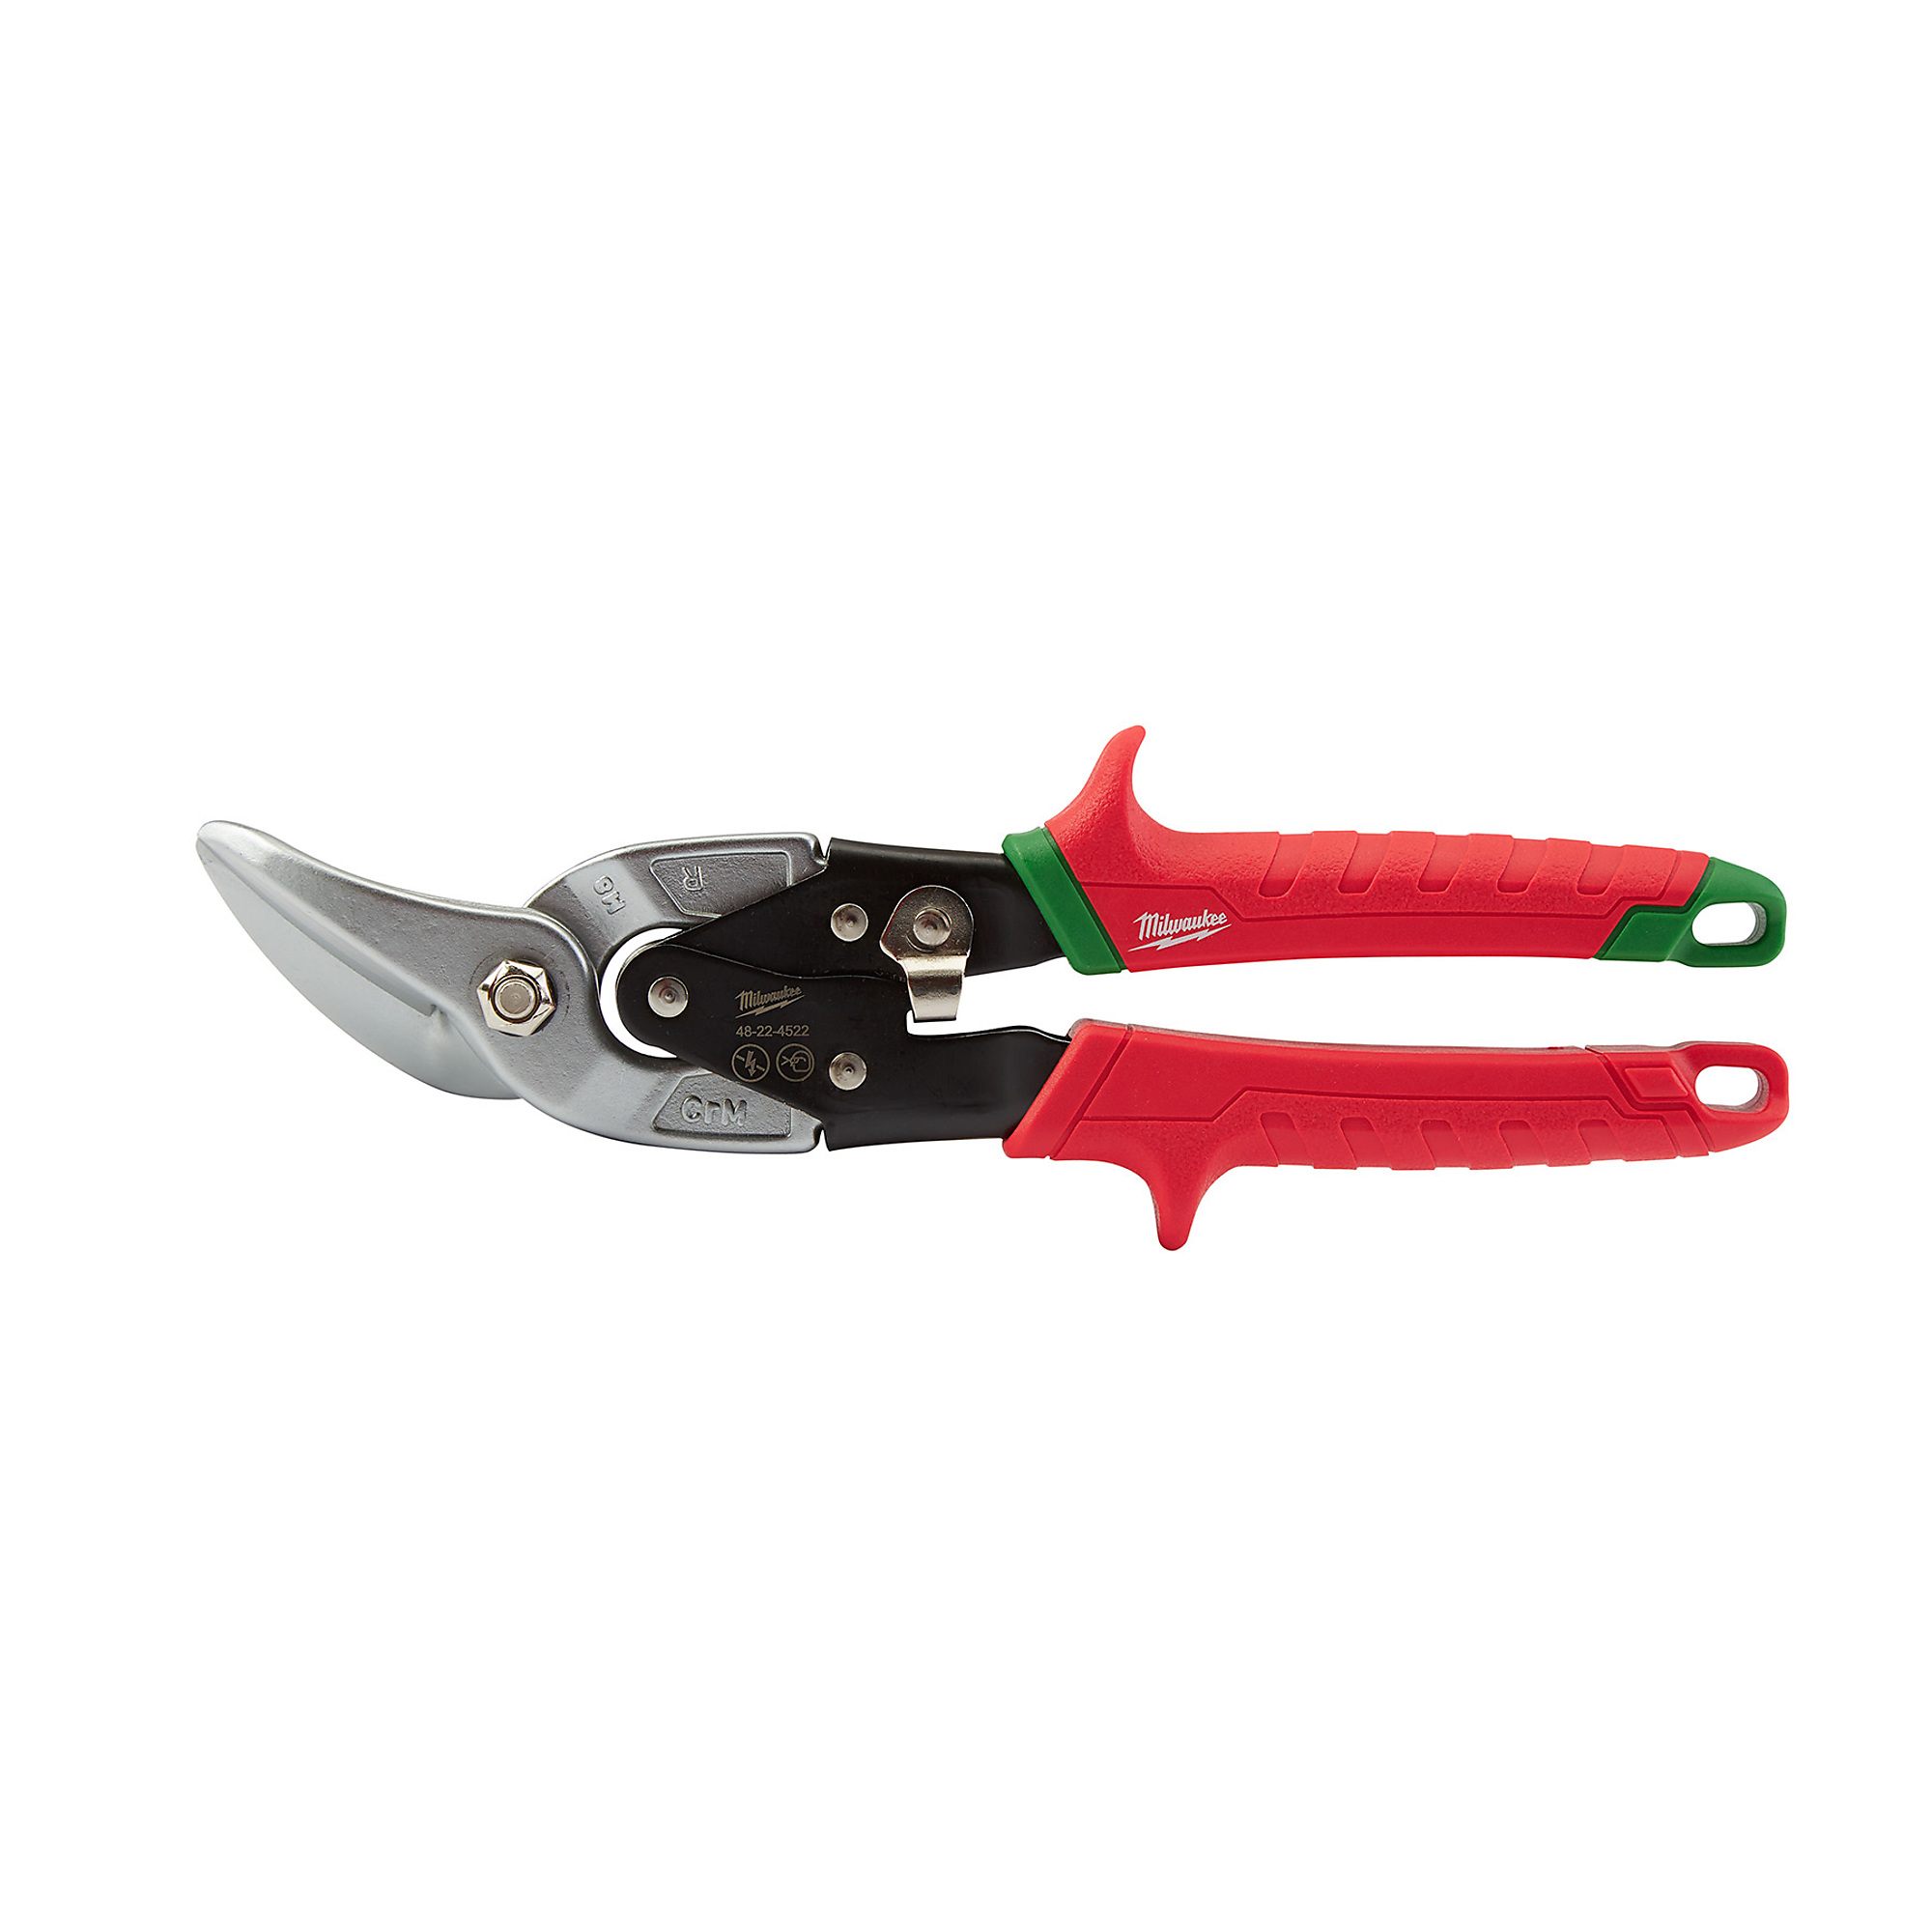 Milwaukee, Right Cutting Offset Snips, Blade Size 5 in, Tool Length 11.45 in, Model 48-22-4522